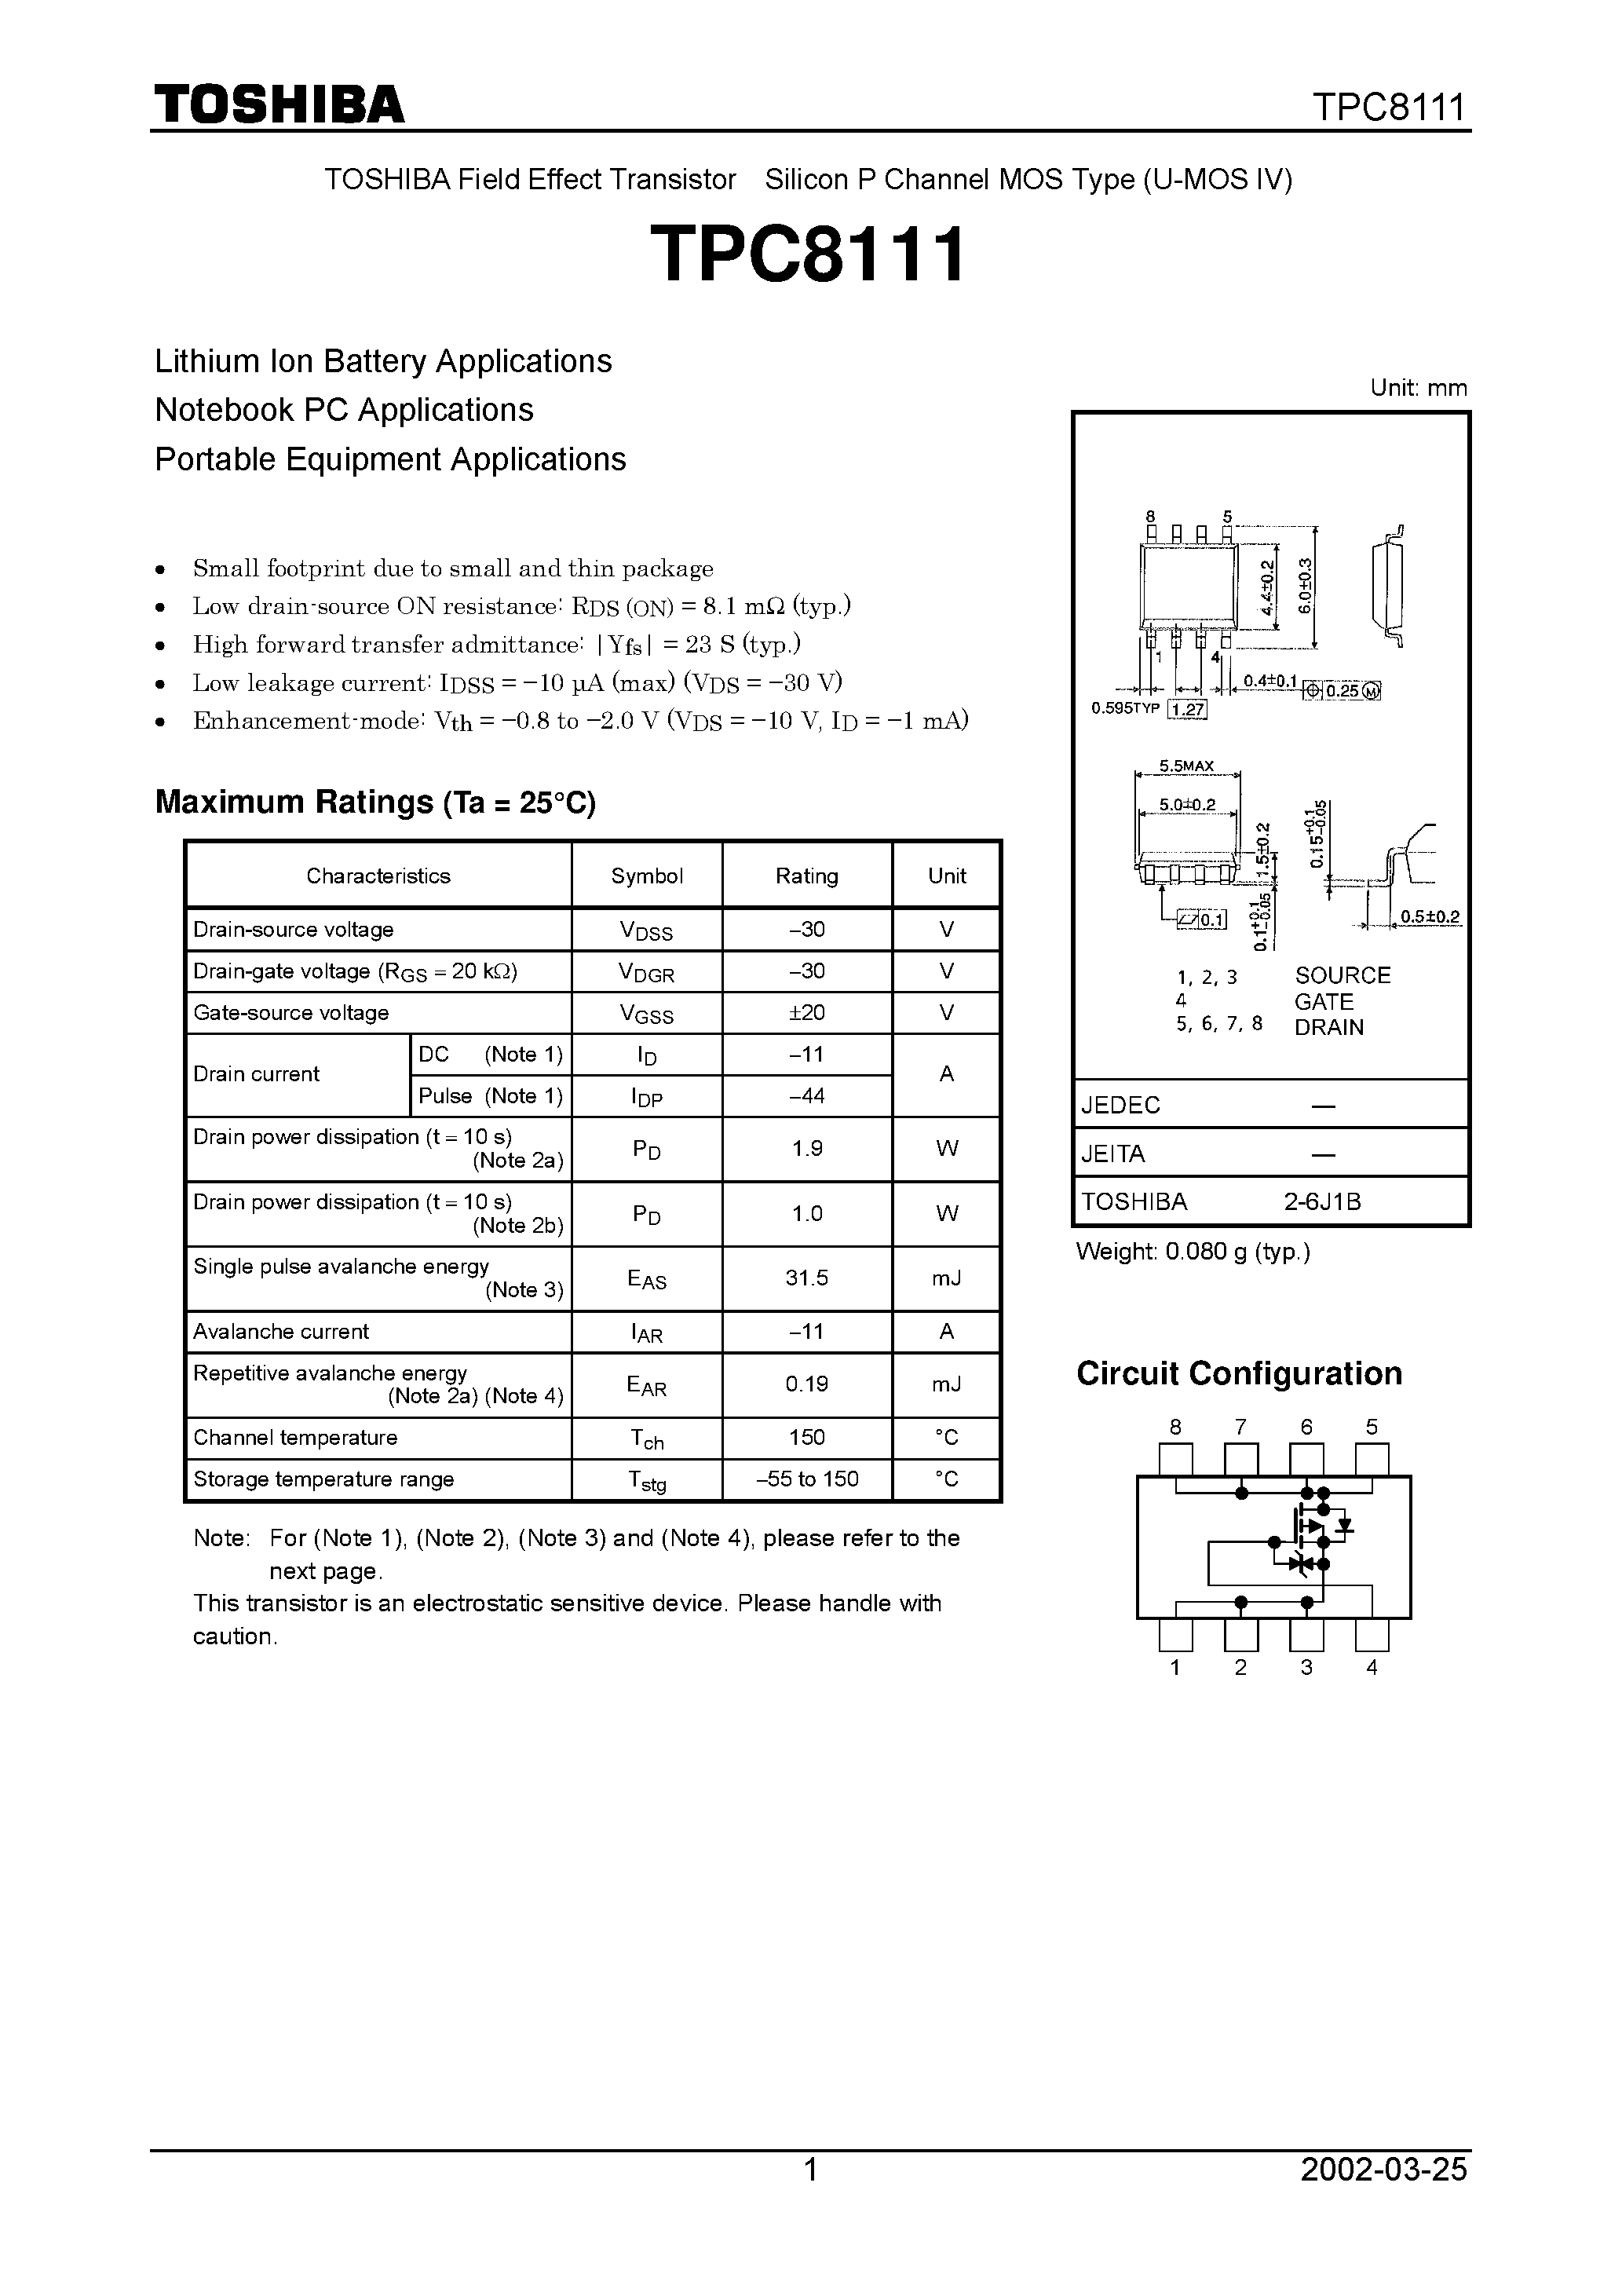 Datasheet TPC8111 - TOSHIBA Field Effect Transistor Silicon P Channel MOS Type (U-MOS IV) page 1